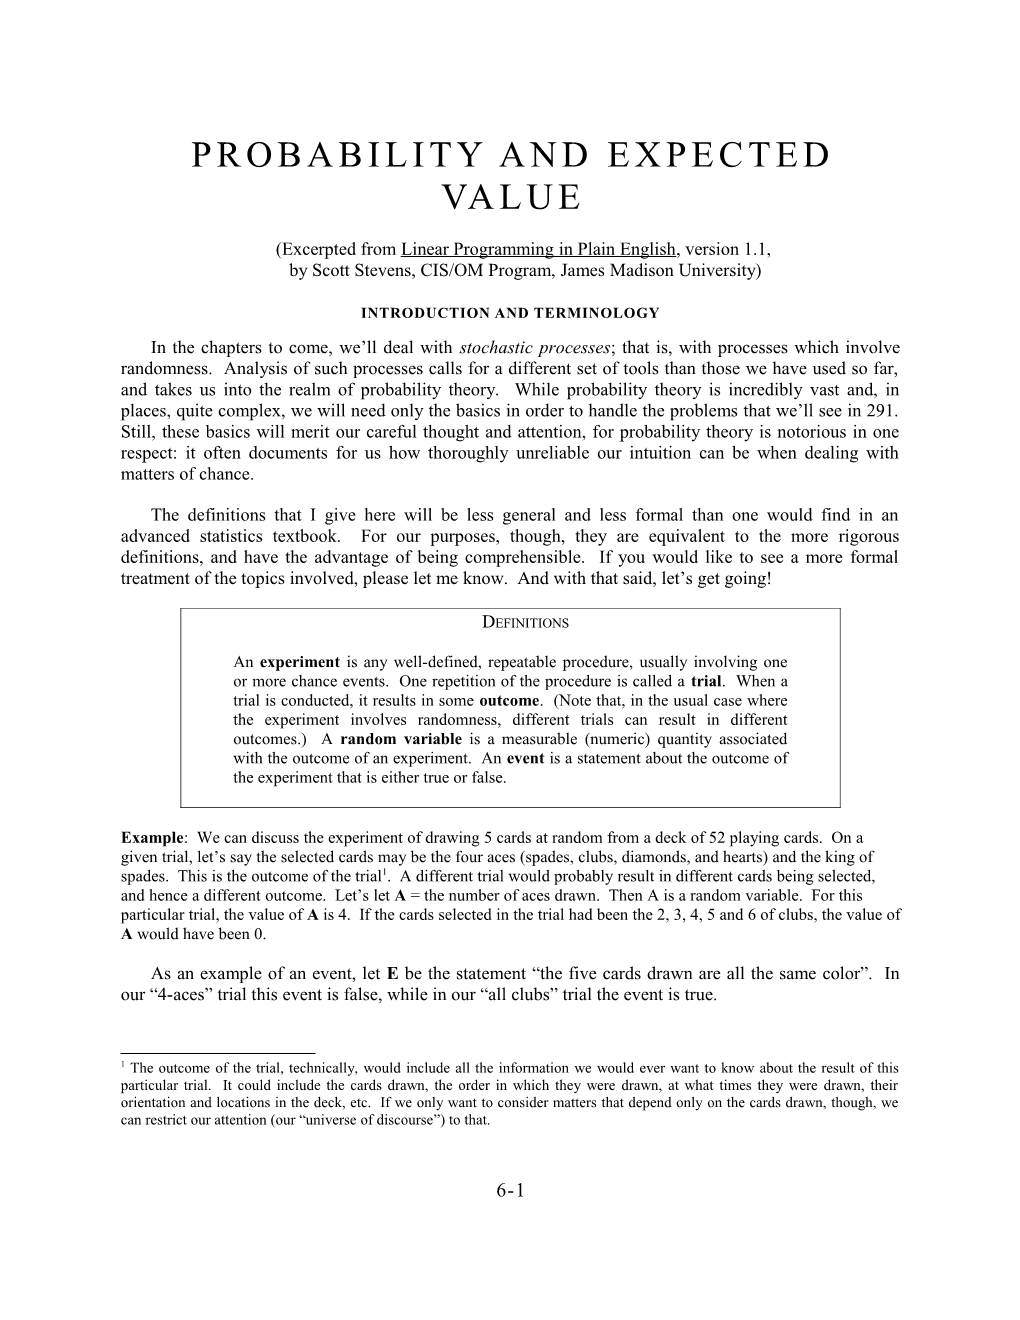 Probability and Expected Value